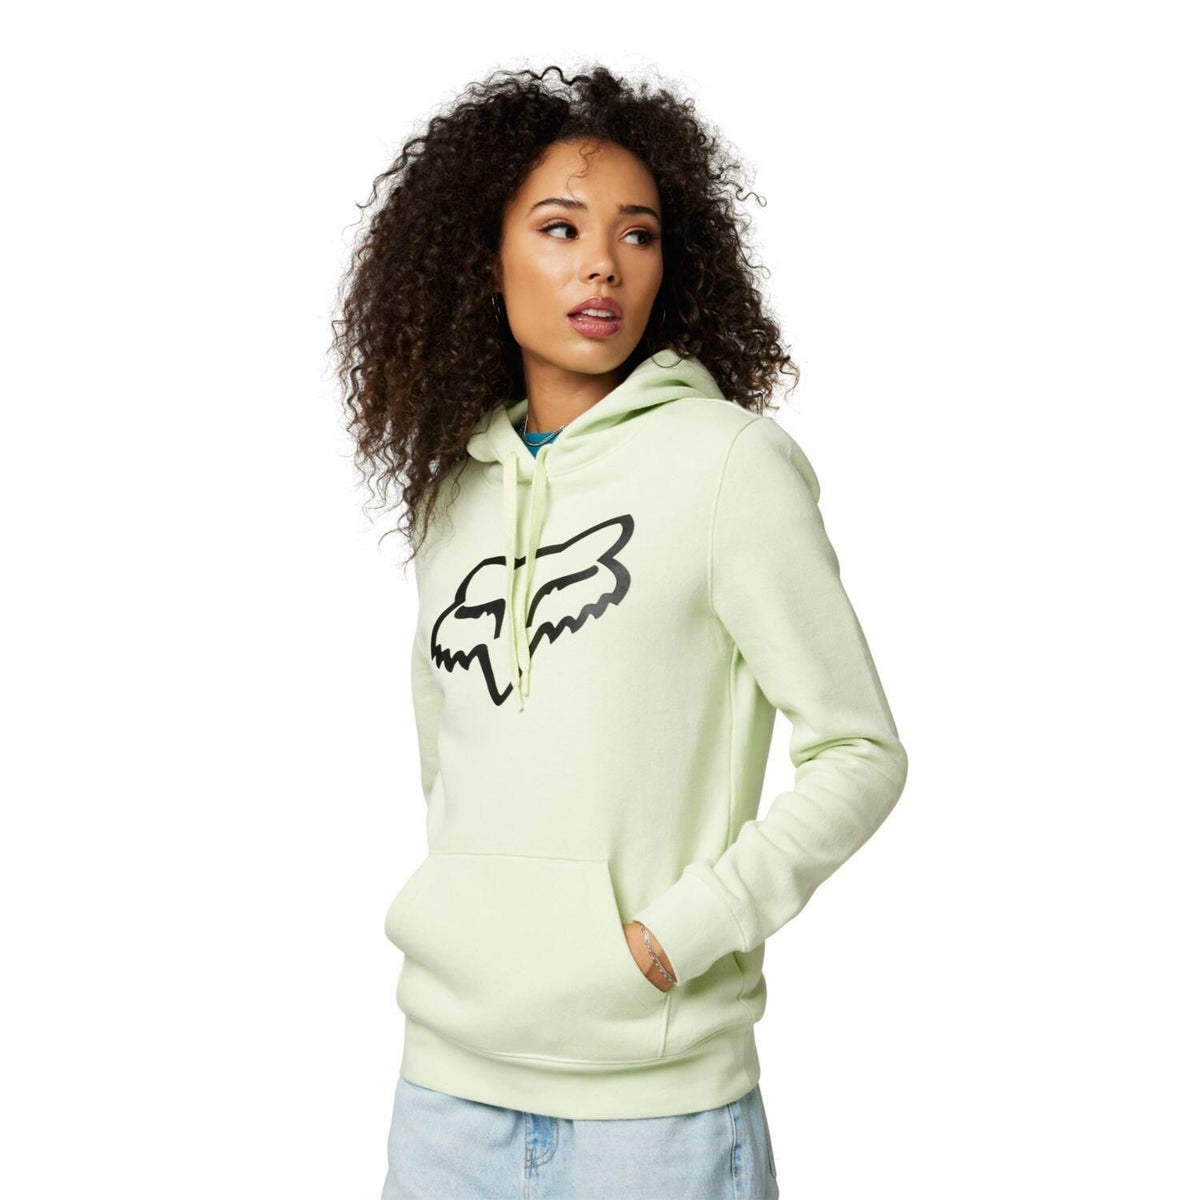 FOX-RACING-BOUNDARY-PULLOVER-FLEECE - PULLOVER HOODIE - Synik Clothing - synikclothing.com